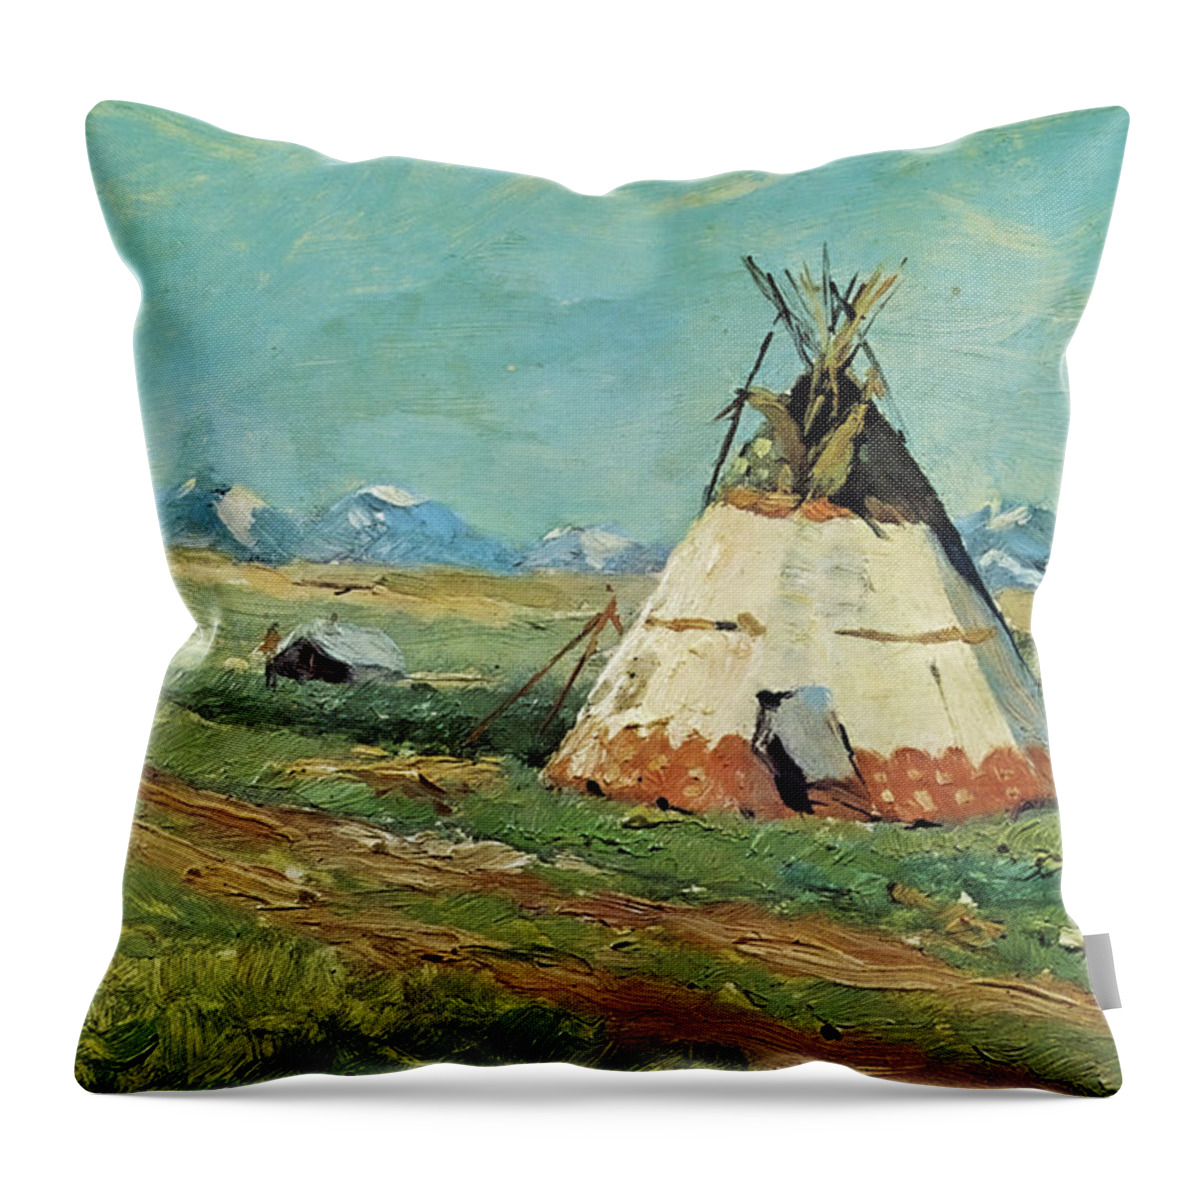 Blackfoot Throw Pillow featuring the painting Blackfoot Reservation Montana by Charles Schreyvogel